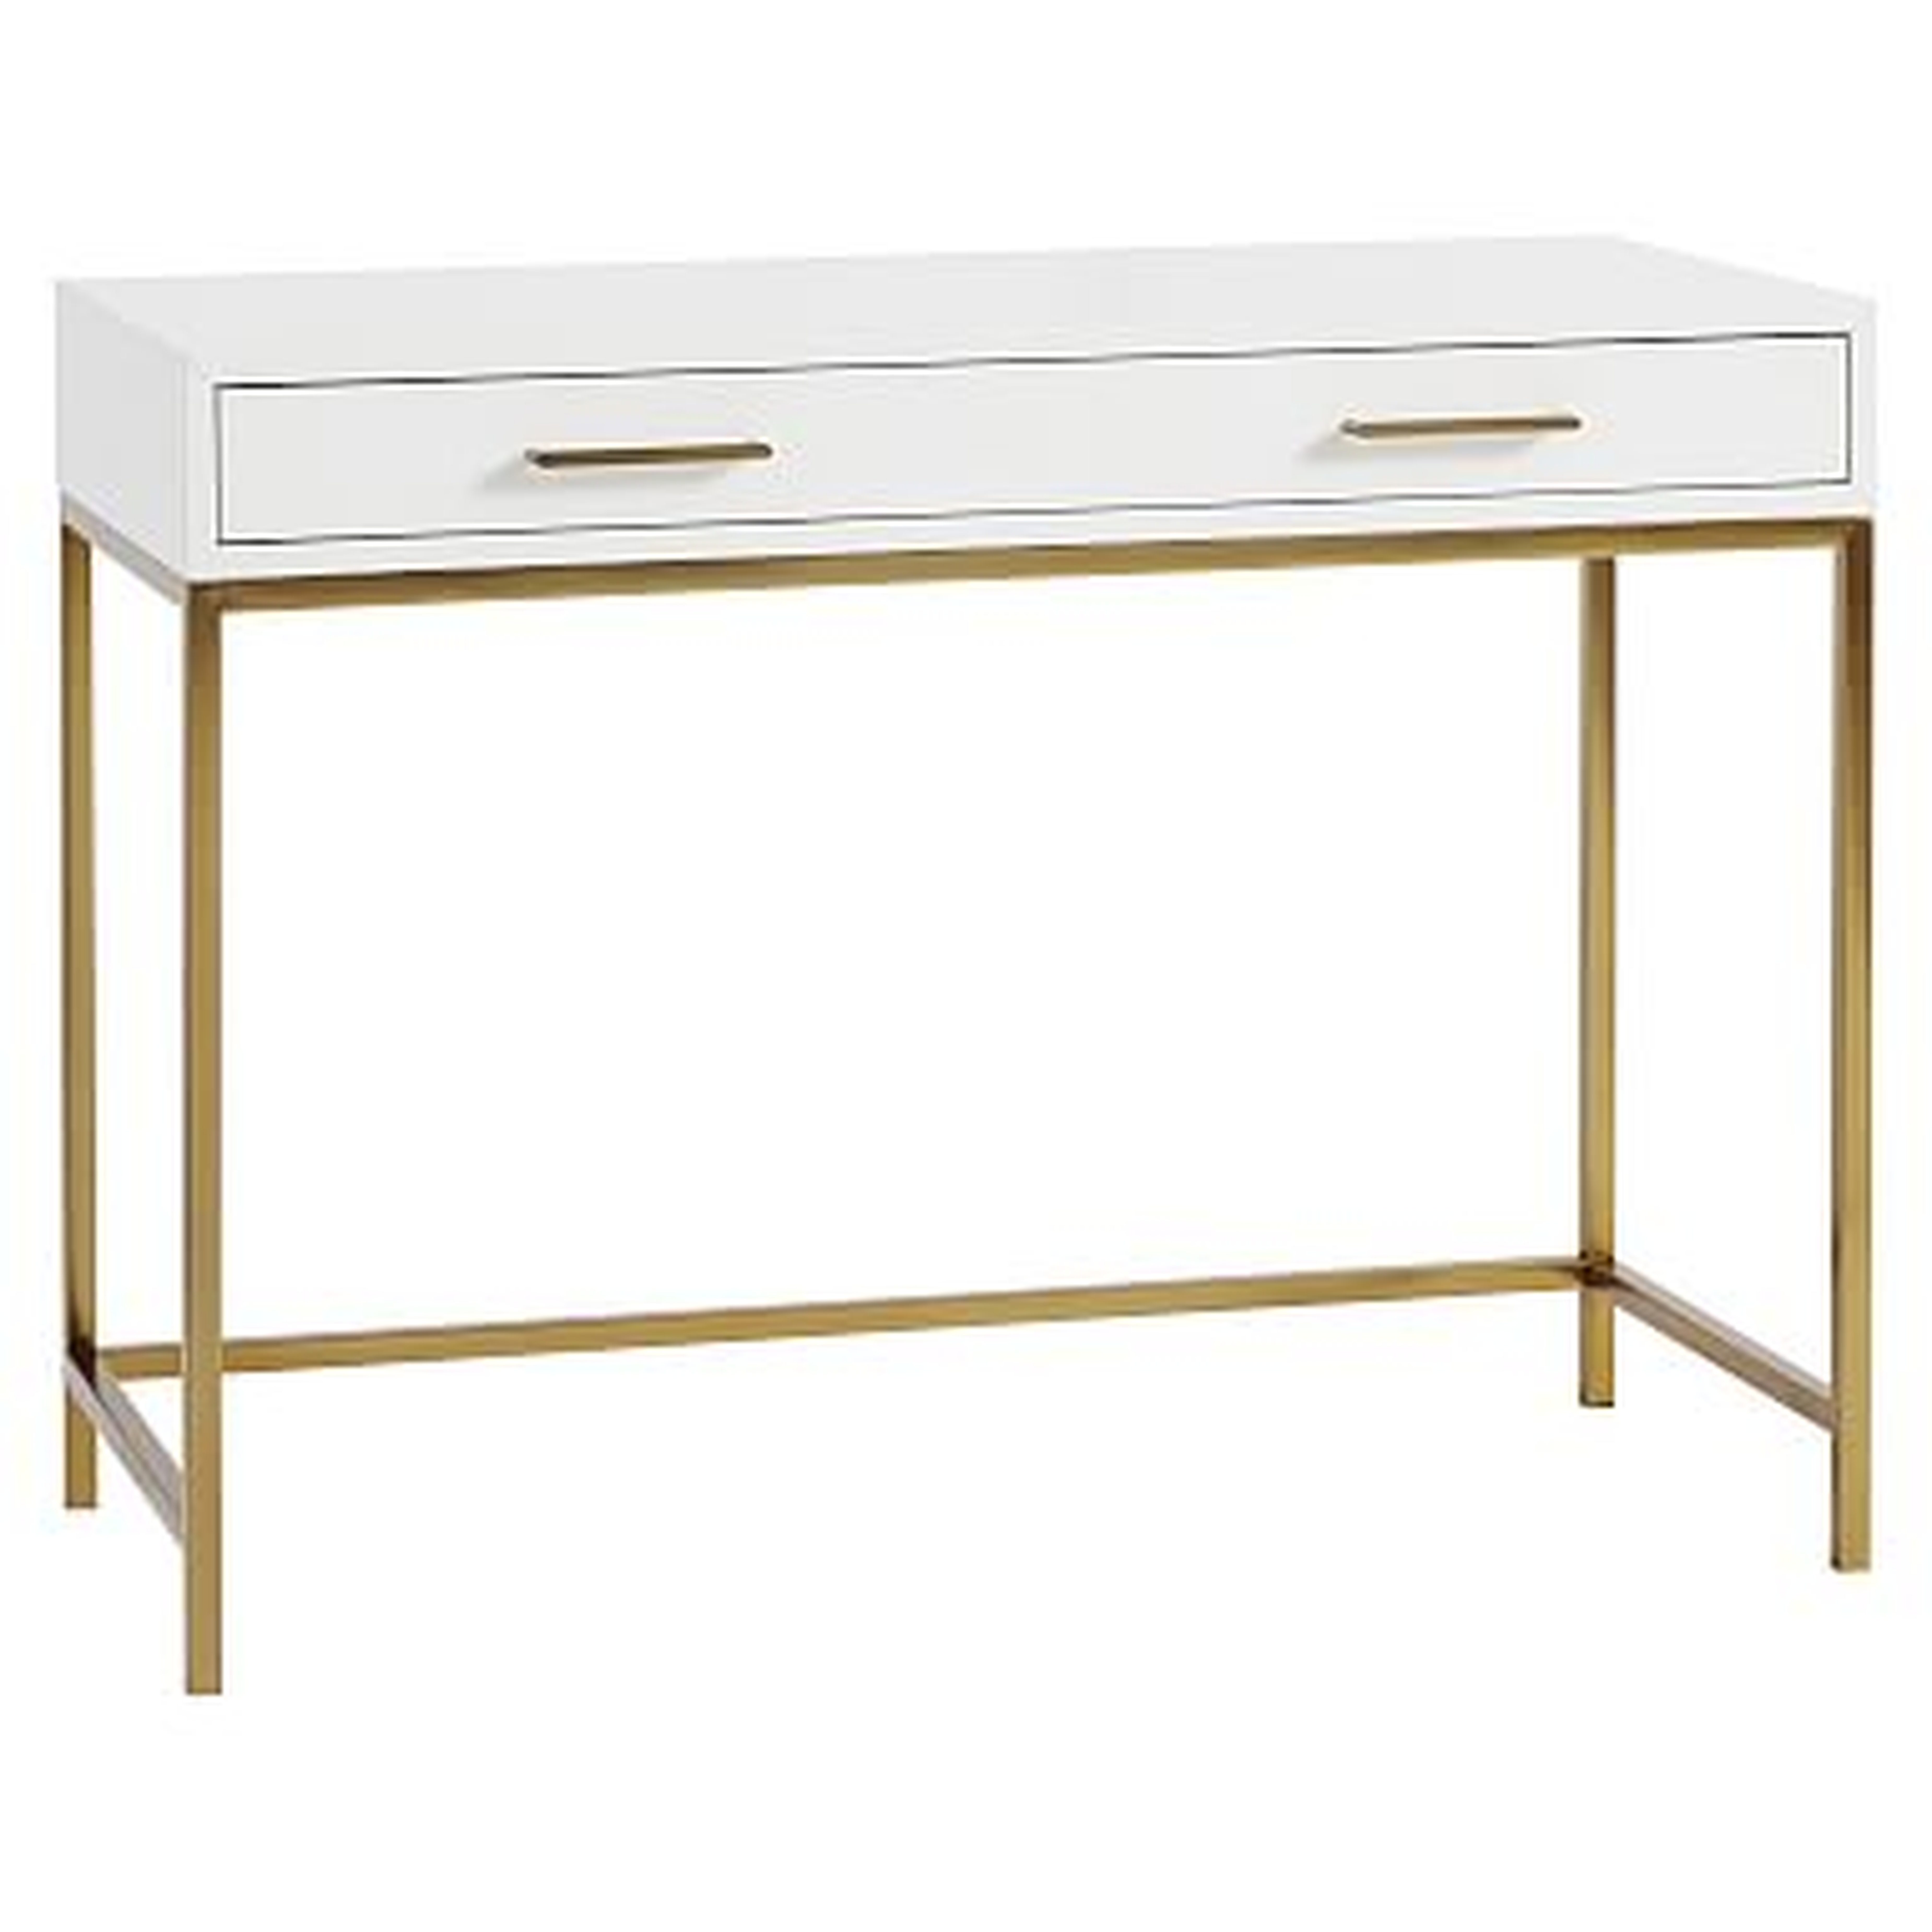 Blaire Classic Desk, Simply White - Pottery Barn Teen